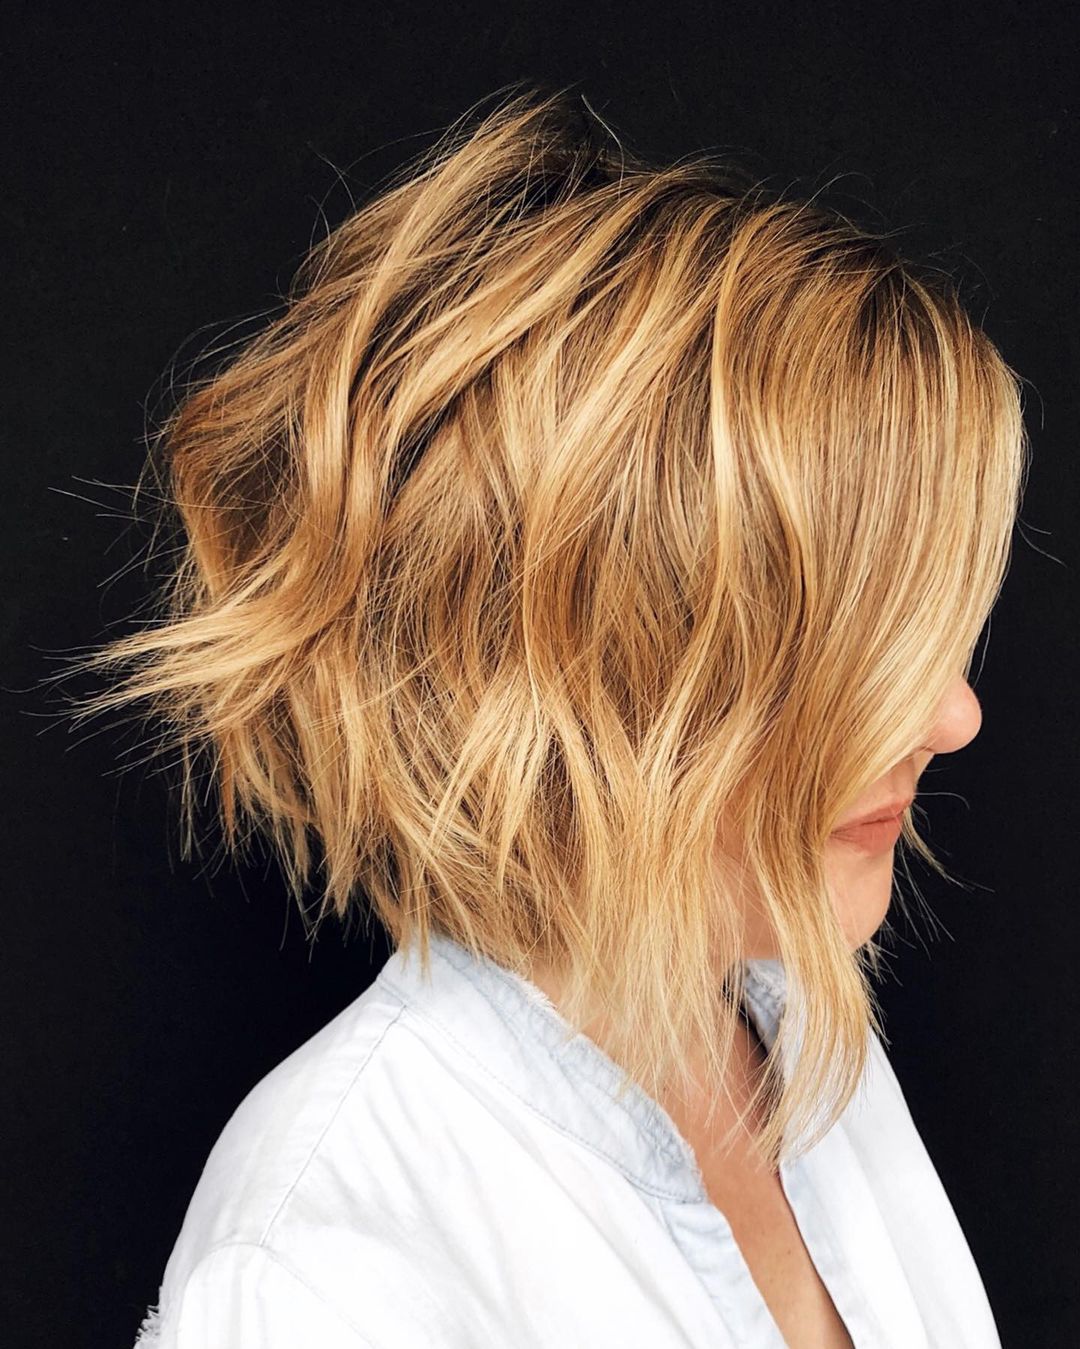 Shoulder-length haircuts with volume: 18 ideas for those who want to flaunt a luxurious look.